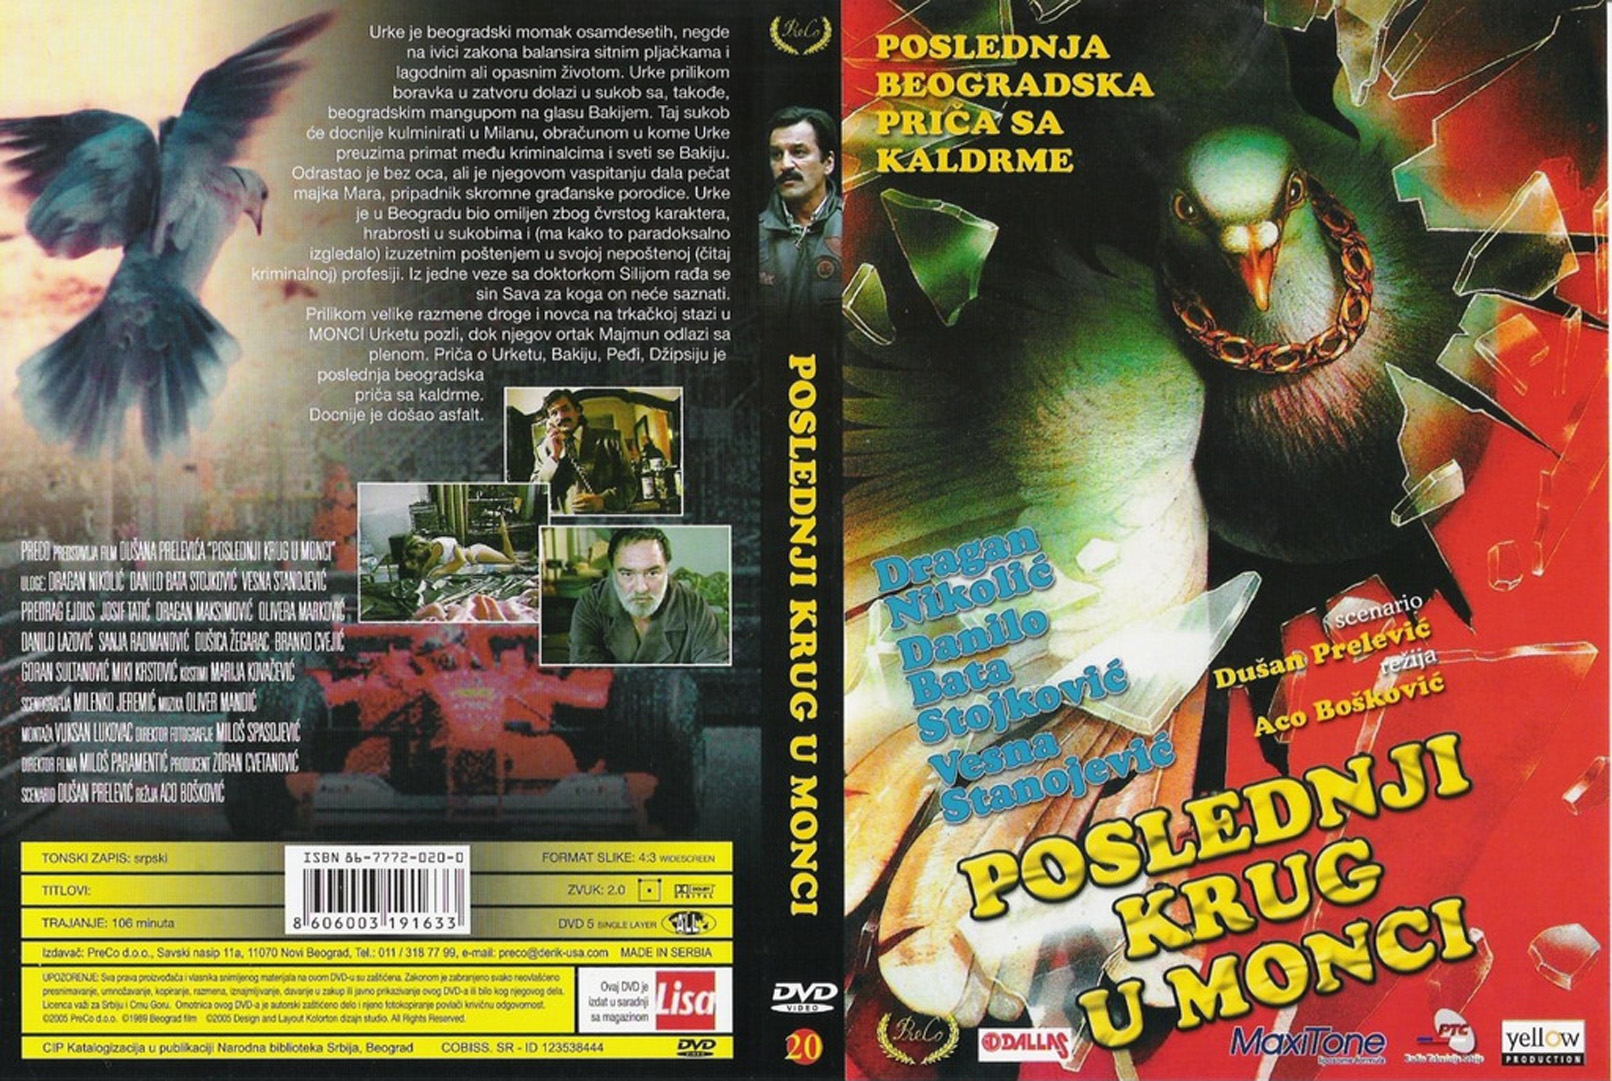 Click to view full size image -  DVD Cover - P - poslednji_krug_u_monci_dvd - poslednji_krug_u_monci_dvd.jpg